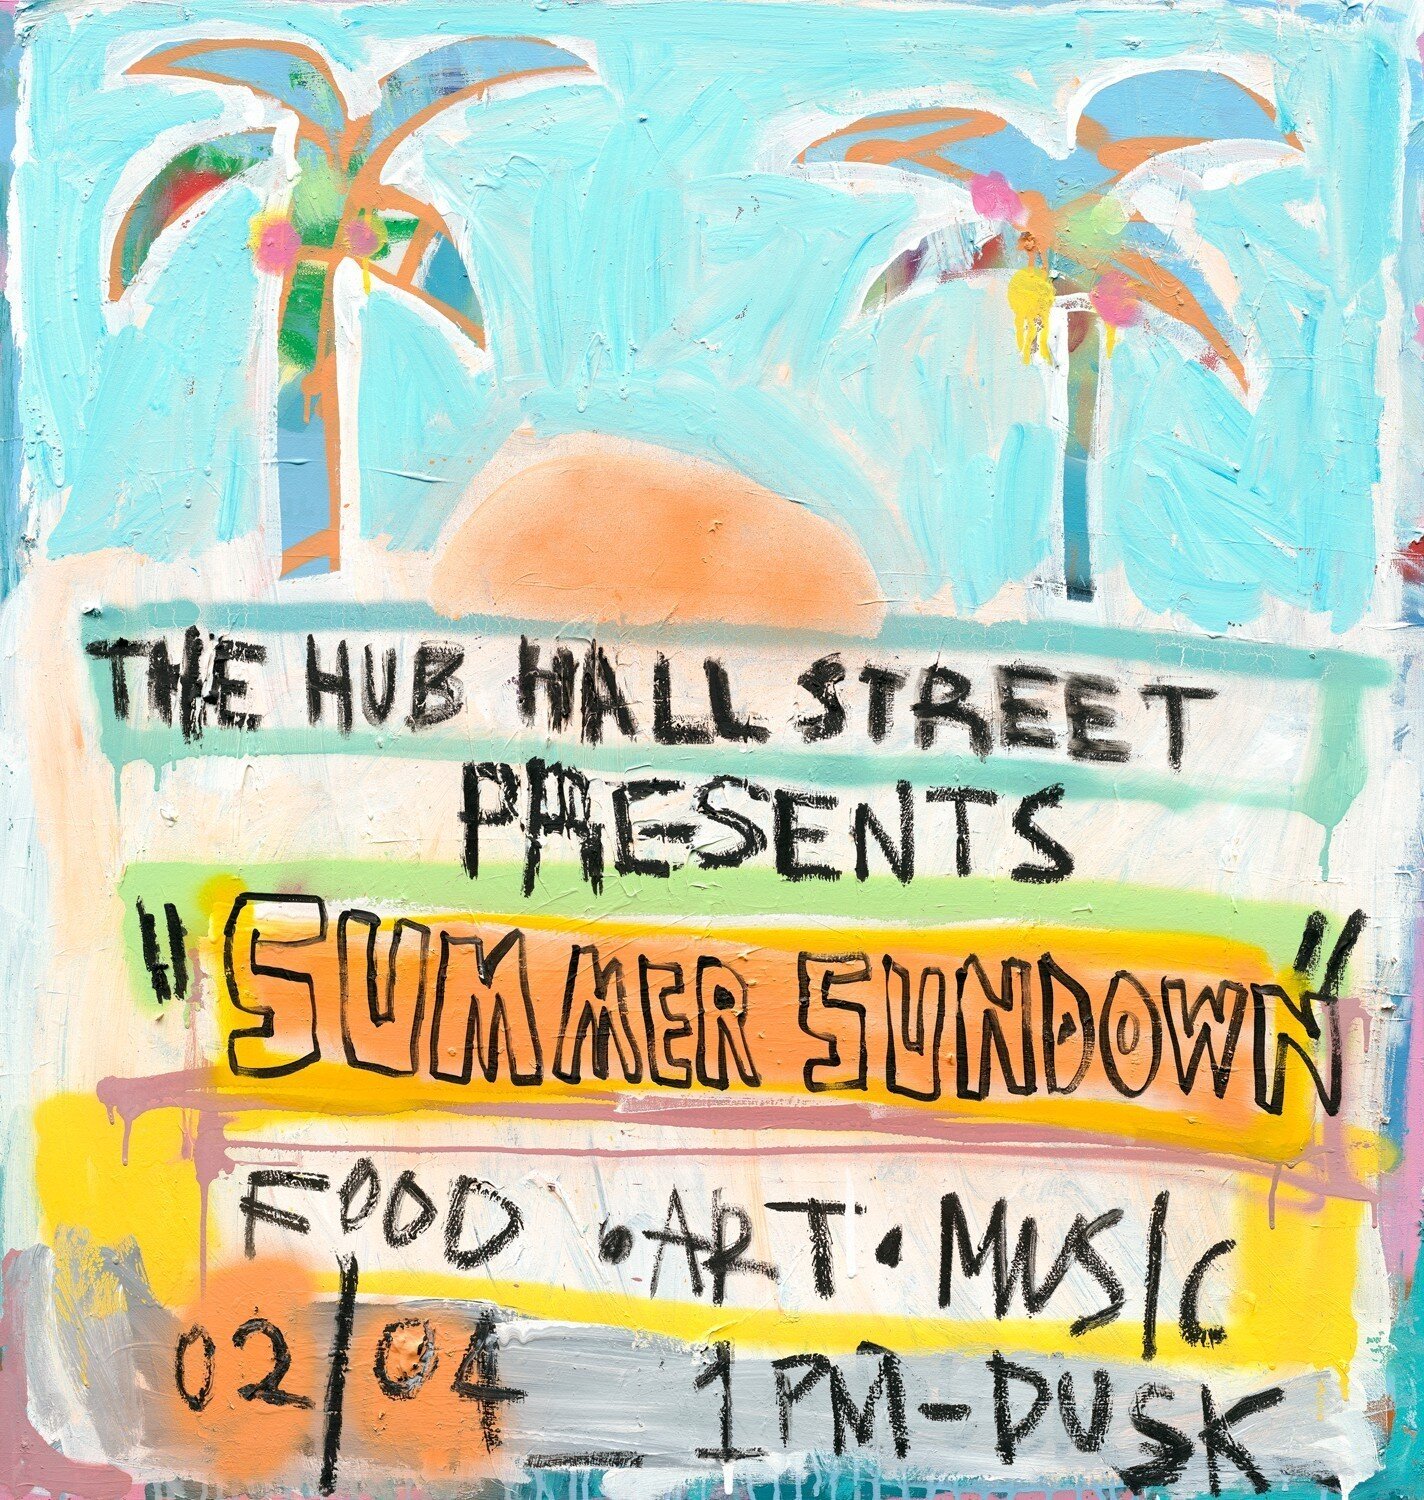 TODAY @LaPalmaBondi will be a part of @thehub_hallstreet party 'Summer Sundown&rsquo; 🌞

Join us for a FREE party, celebrating local food, art and music, from 1pm. LIVE music from @murraylake.sentir, artwork by Bondi-based neo-expressionist artist @